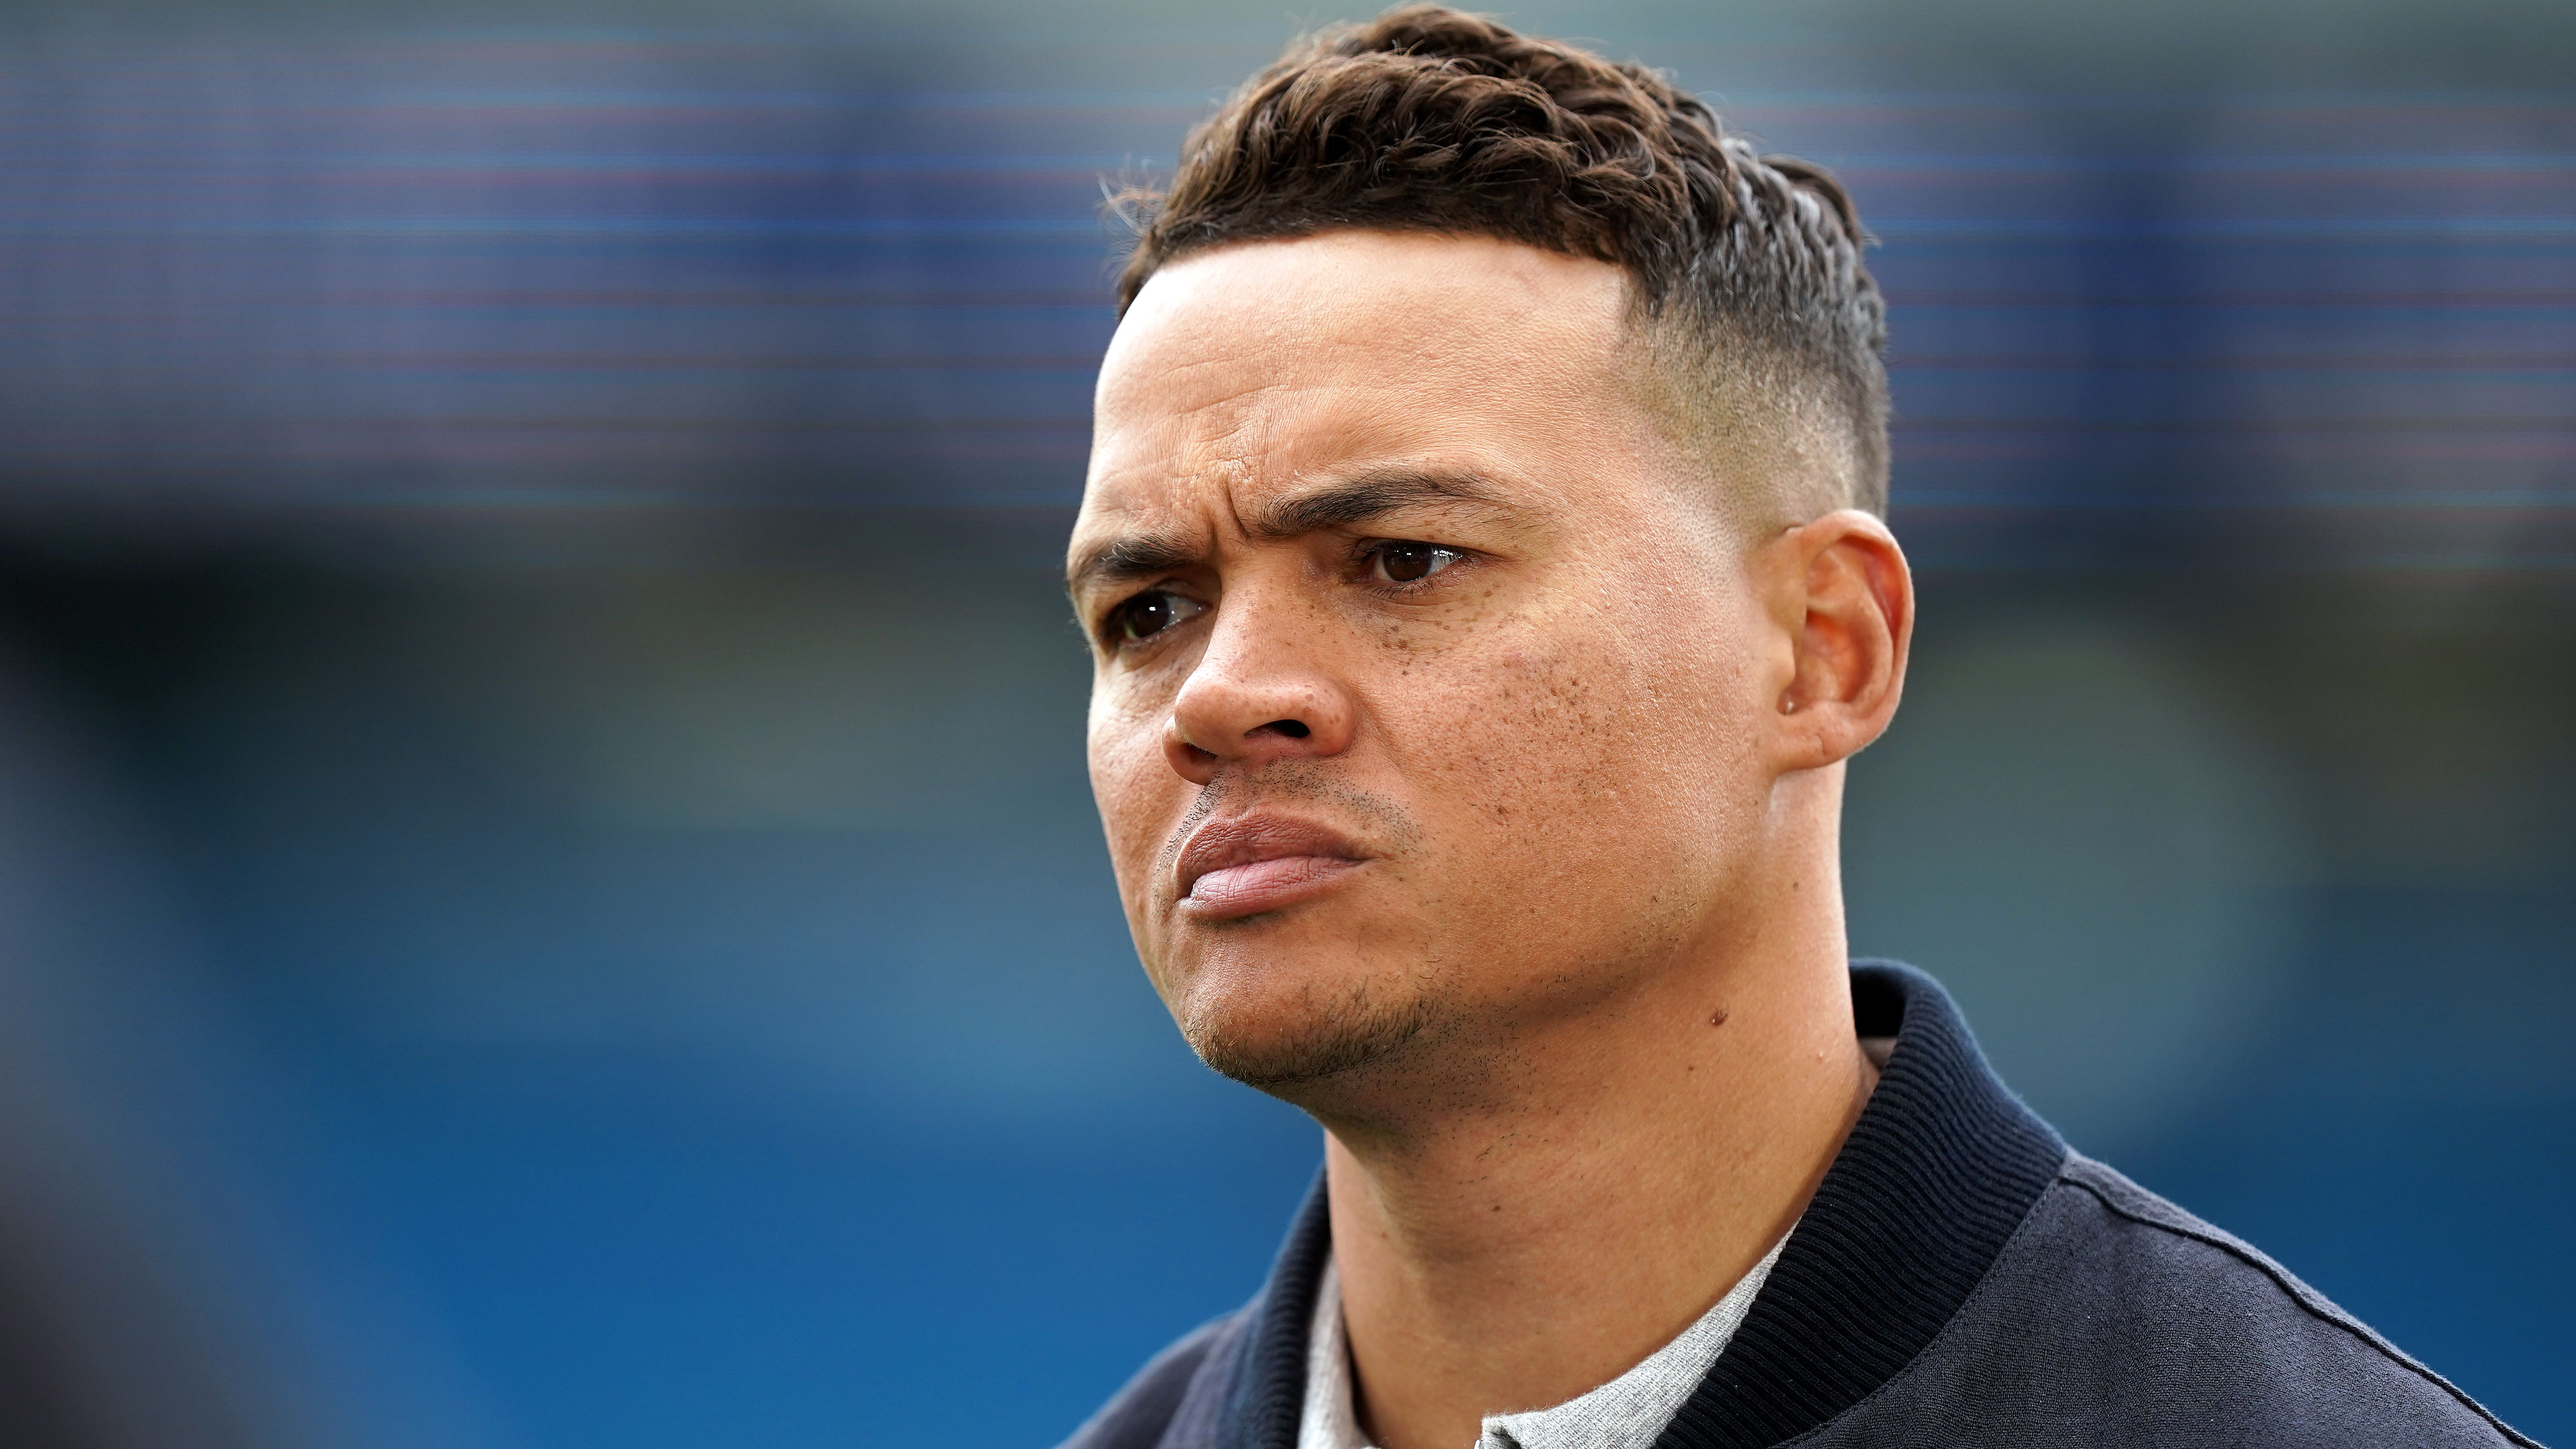 I got it wrong – Jermaine Jenas apologises after using abusive term towards ref